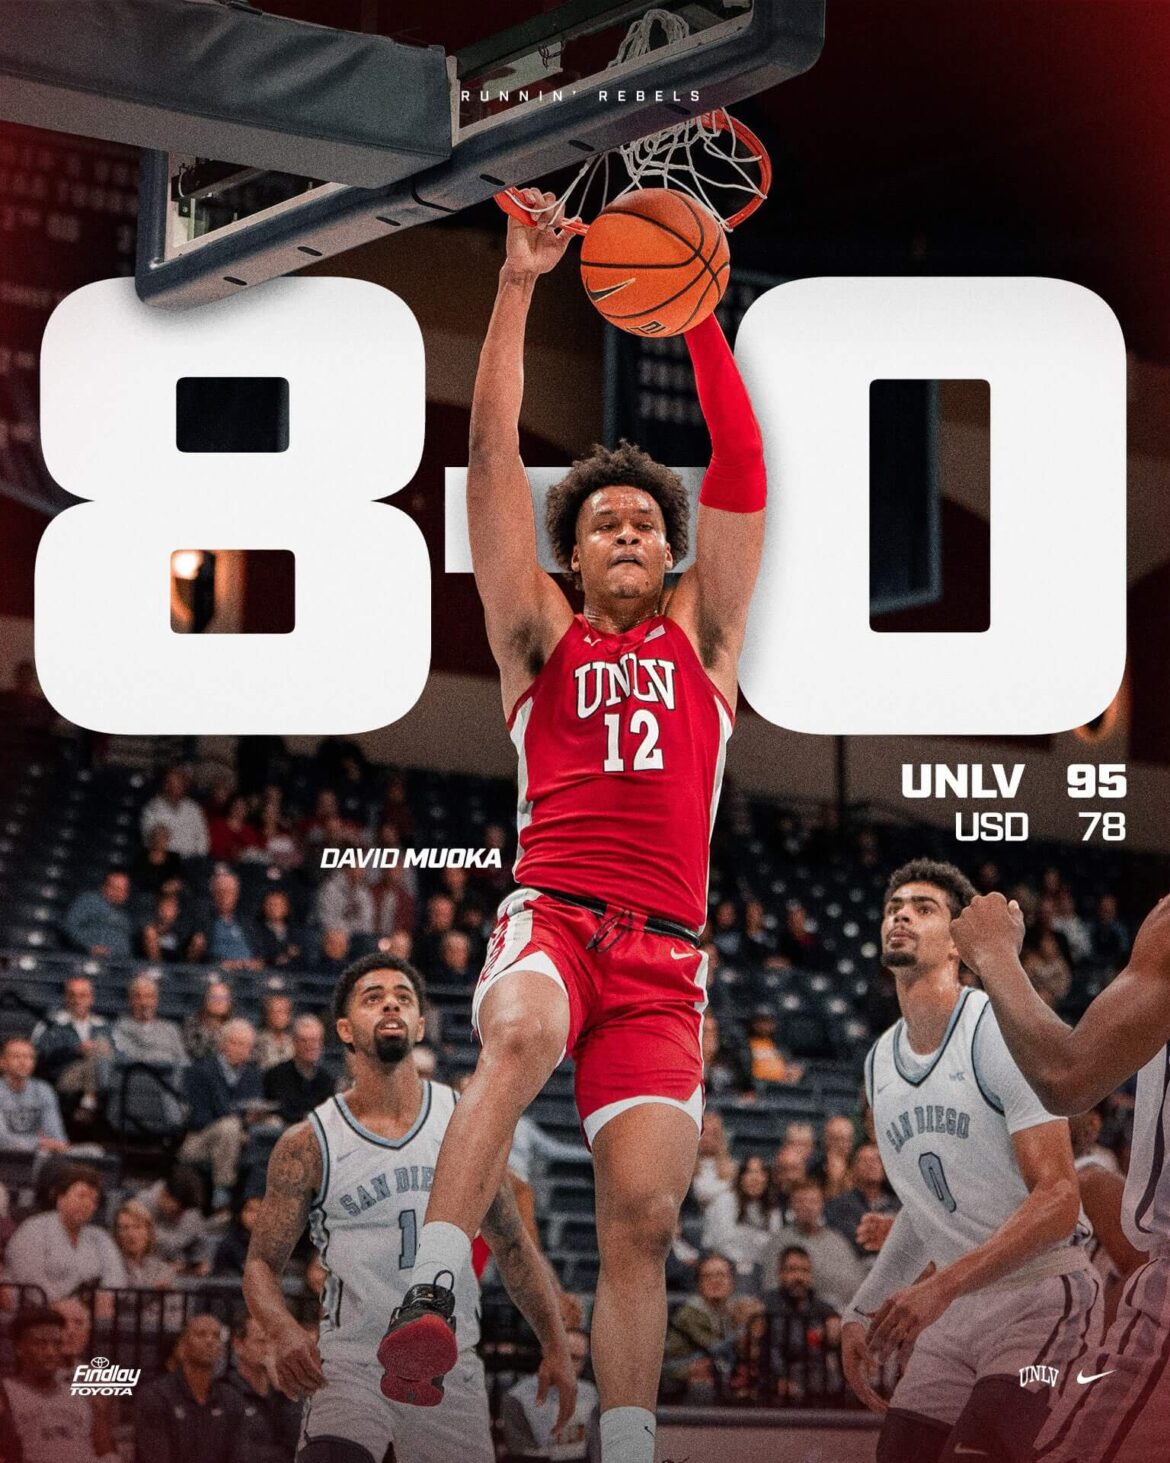 Rebels hit the road for win over USD